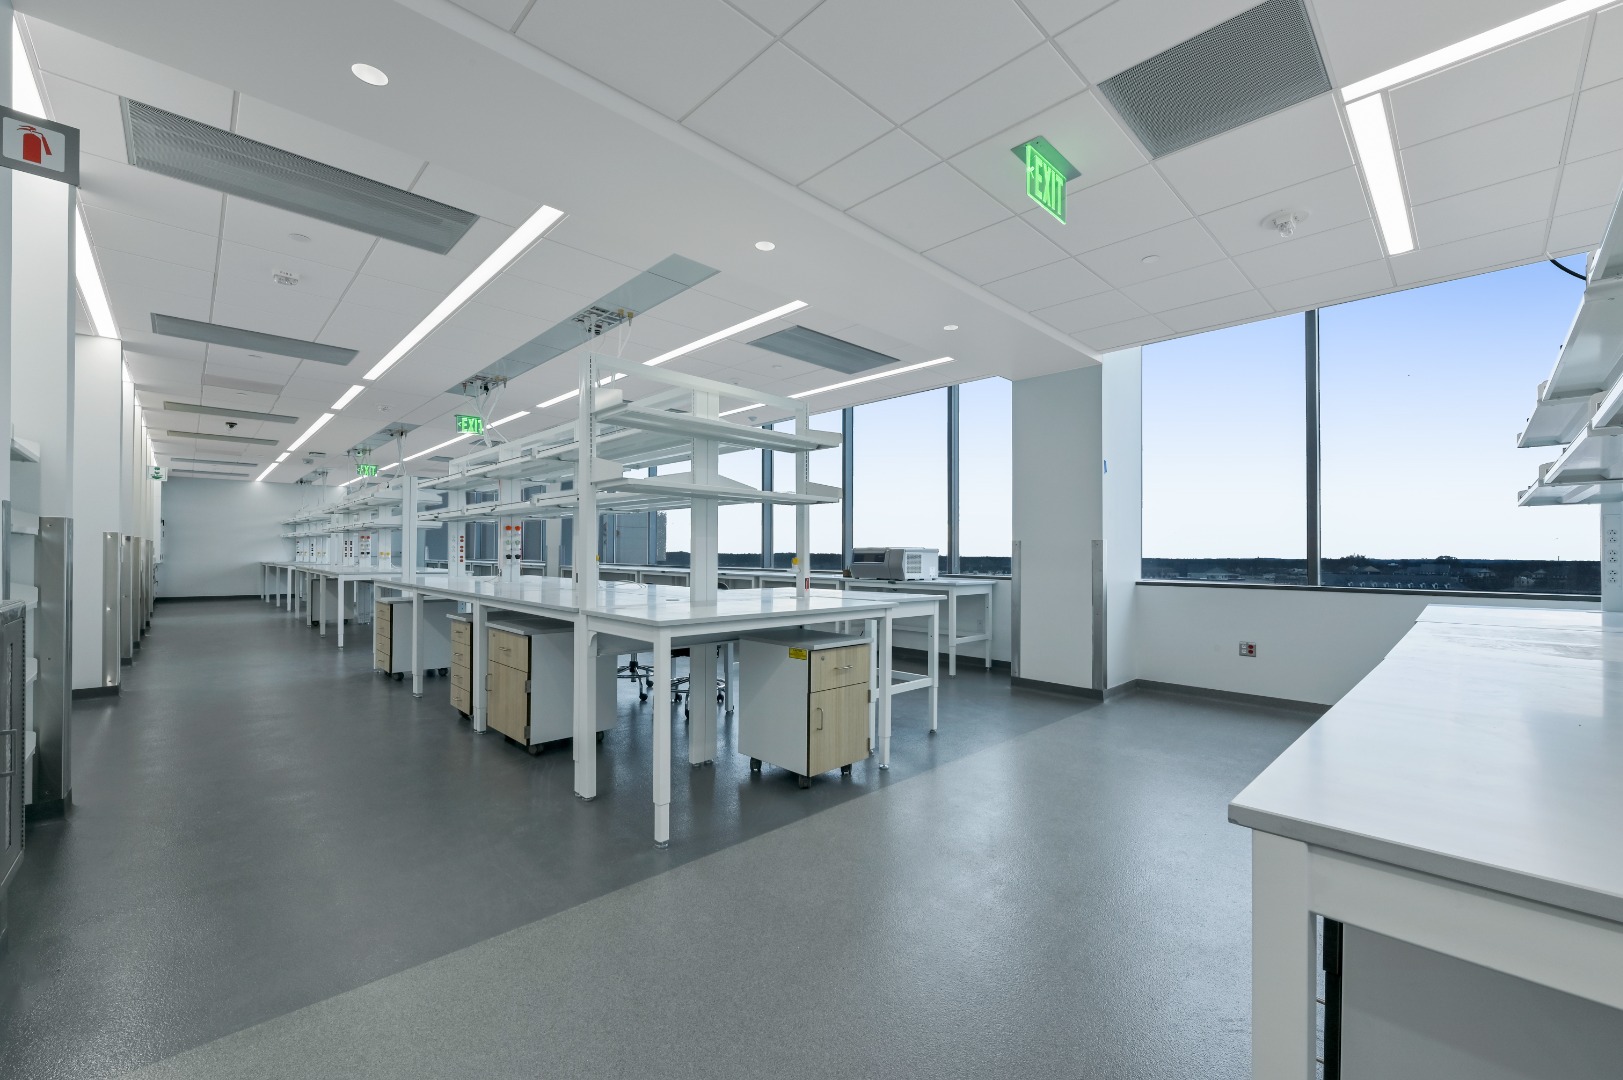 A newly renovated laboratory includes updated process equipment, work spaces, and a new epoxy floor topping.